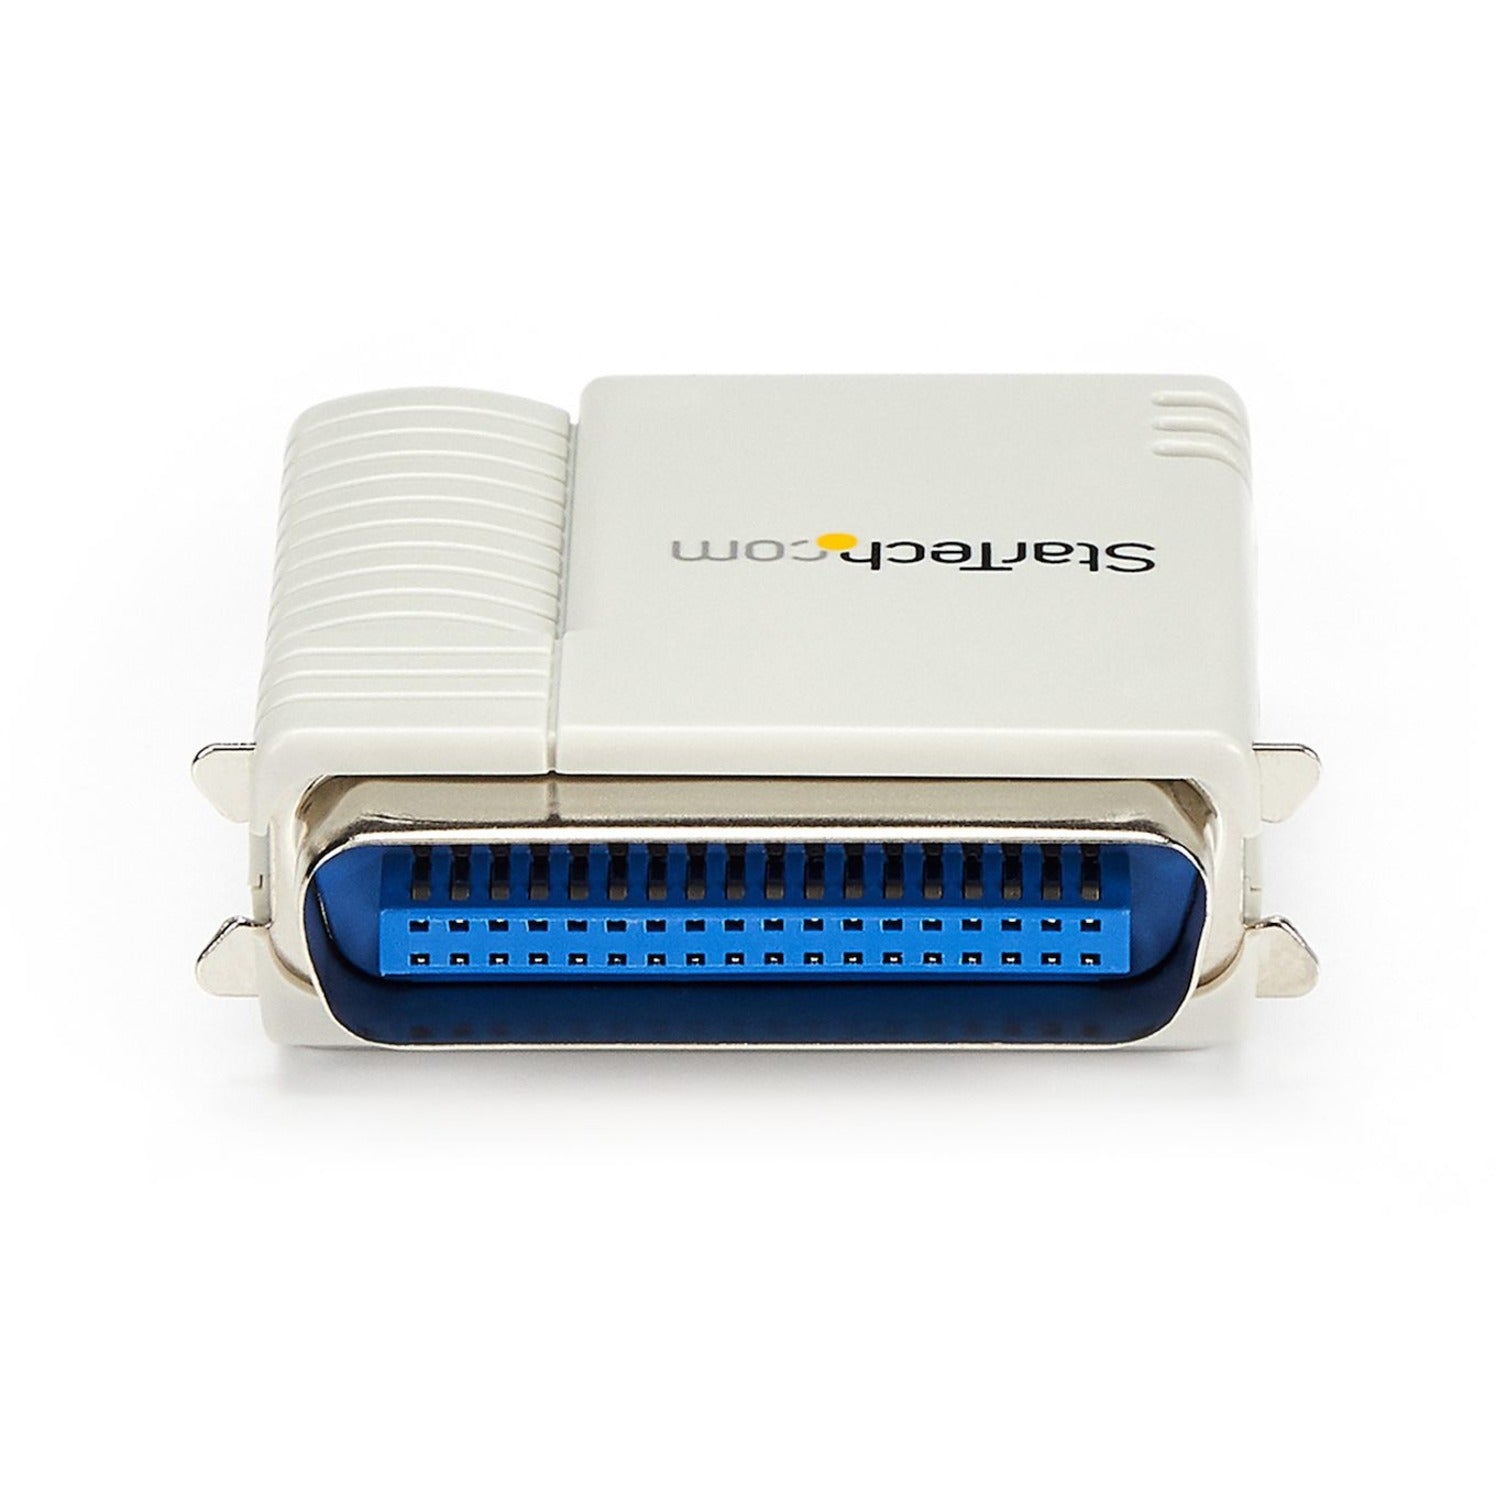 StarTech.com PM1115P2 1 Port 10/100 Mbps Ethernet Parallel Network Print Server, TAA Compliant, 2 Year Warranty